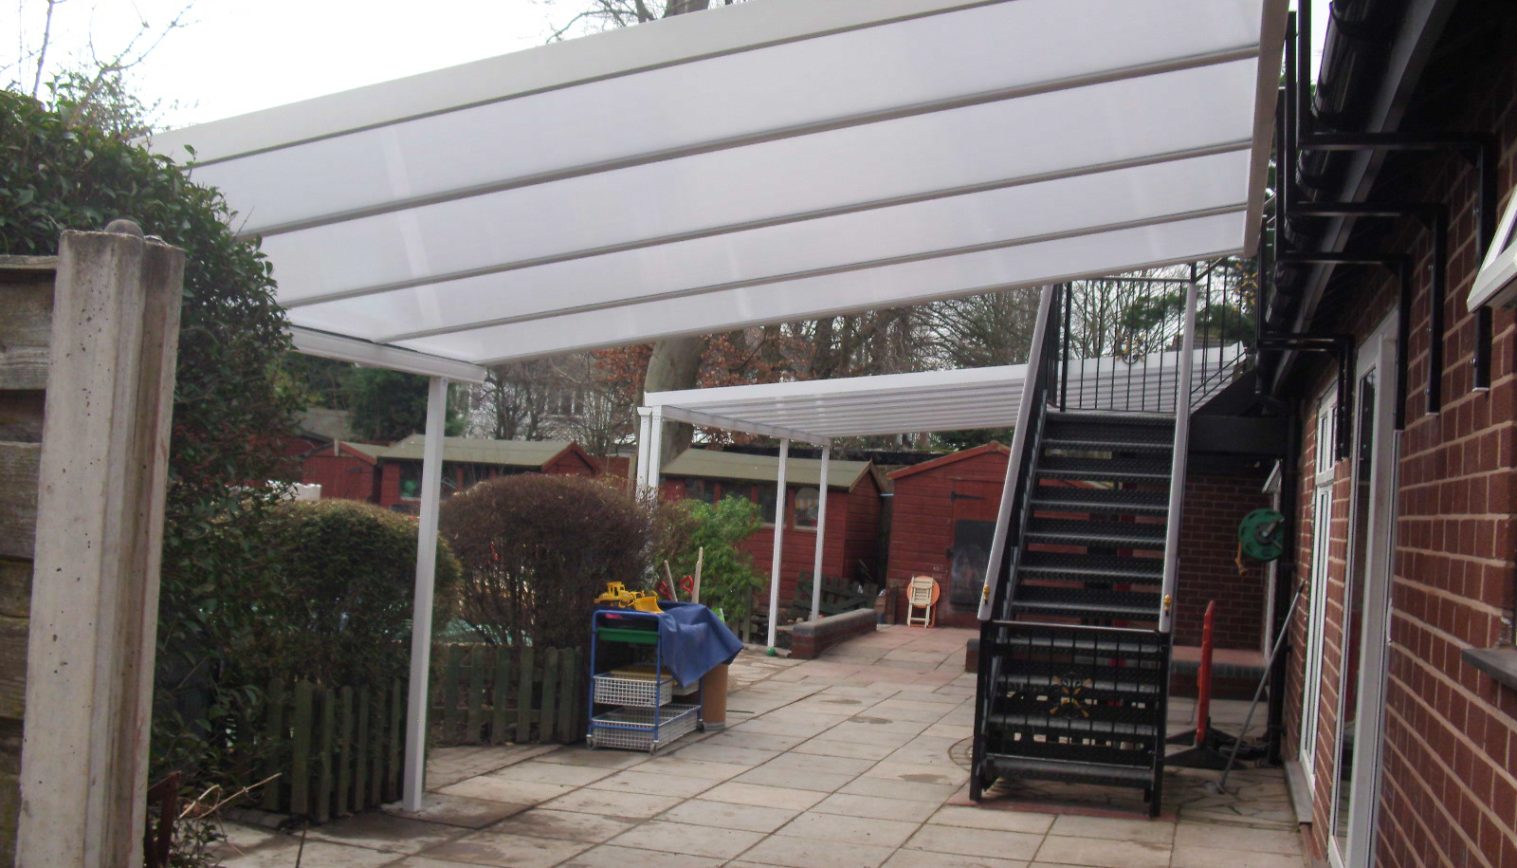 Ruperts Day Nursery – Wall Mounted Canopy